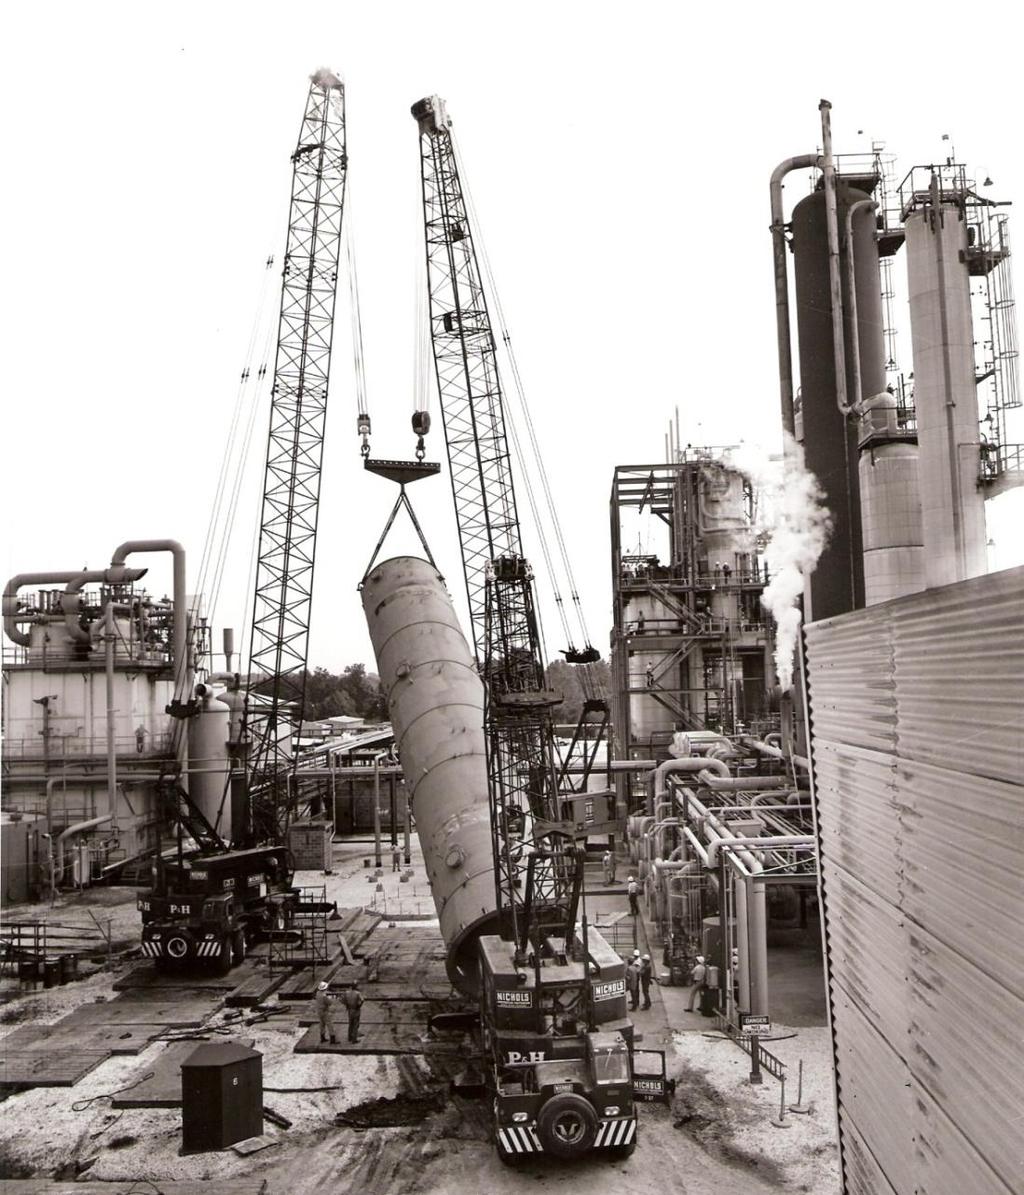 ERECTION OF A PRESSURE VESSEL WITH TWO